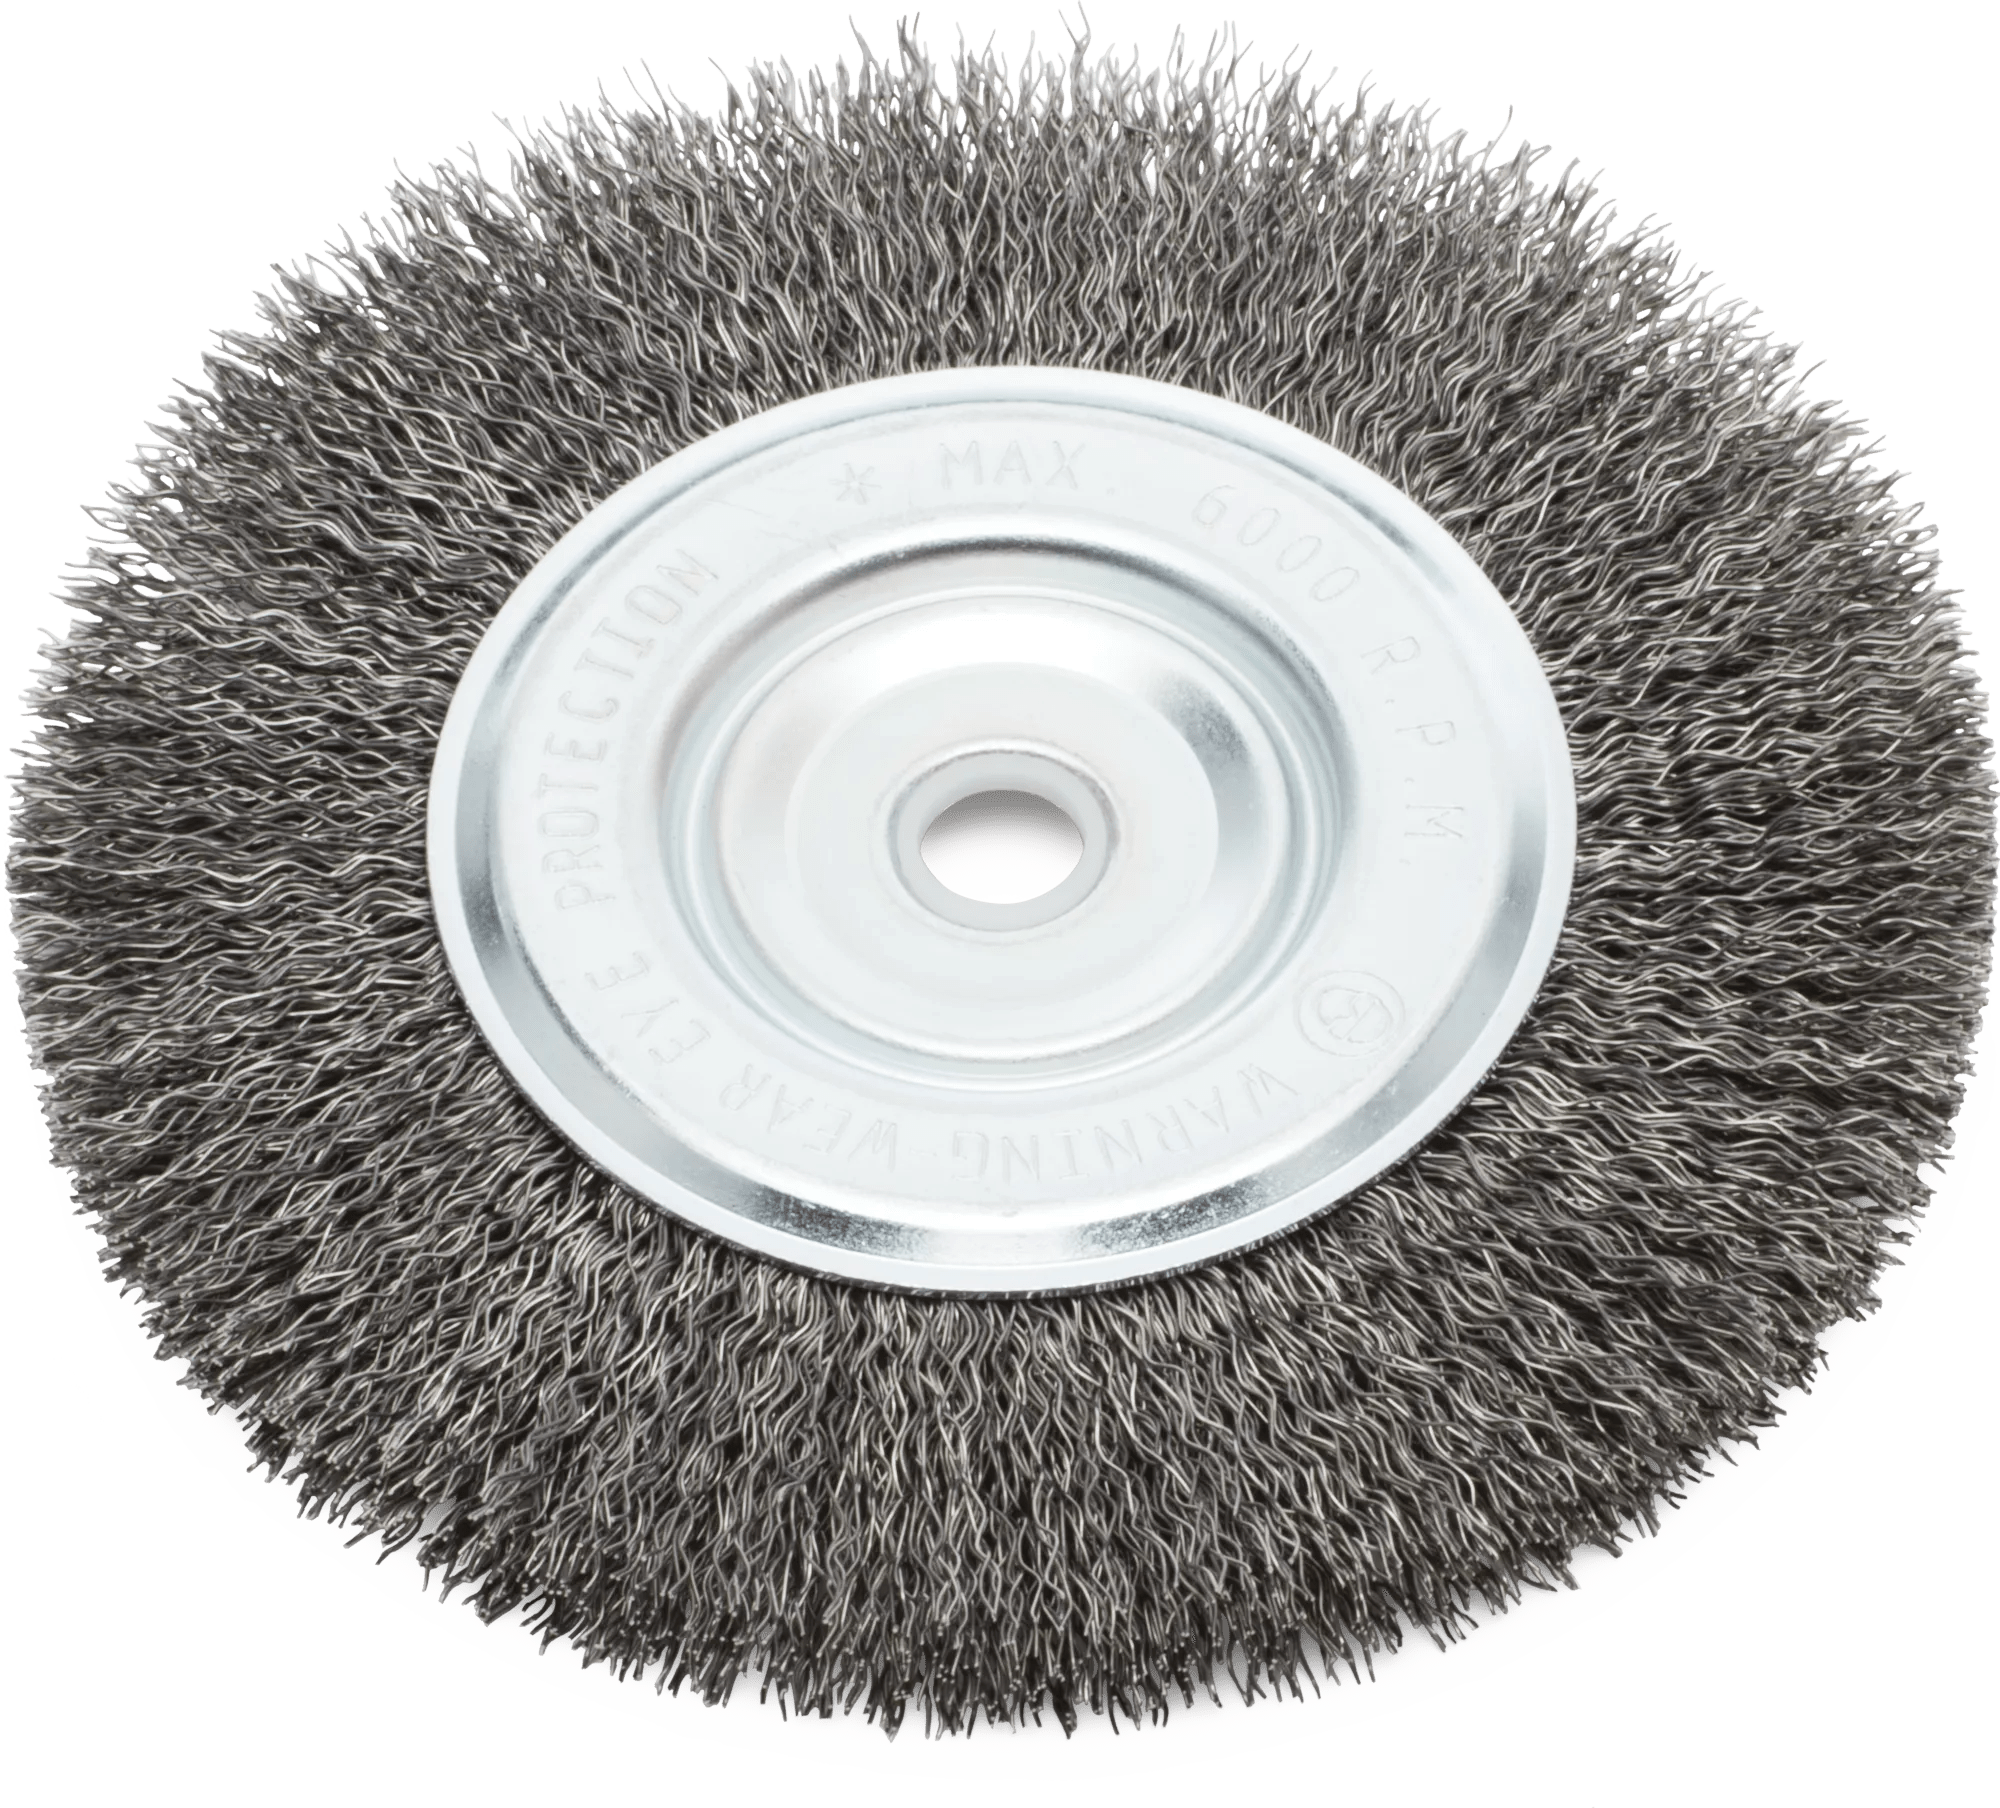 4" x 1/2" Narrow Face Stainless Steel Wire Brush Wheel